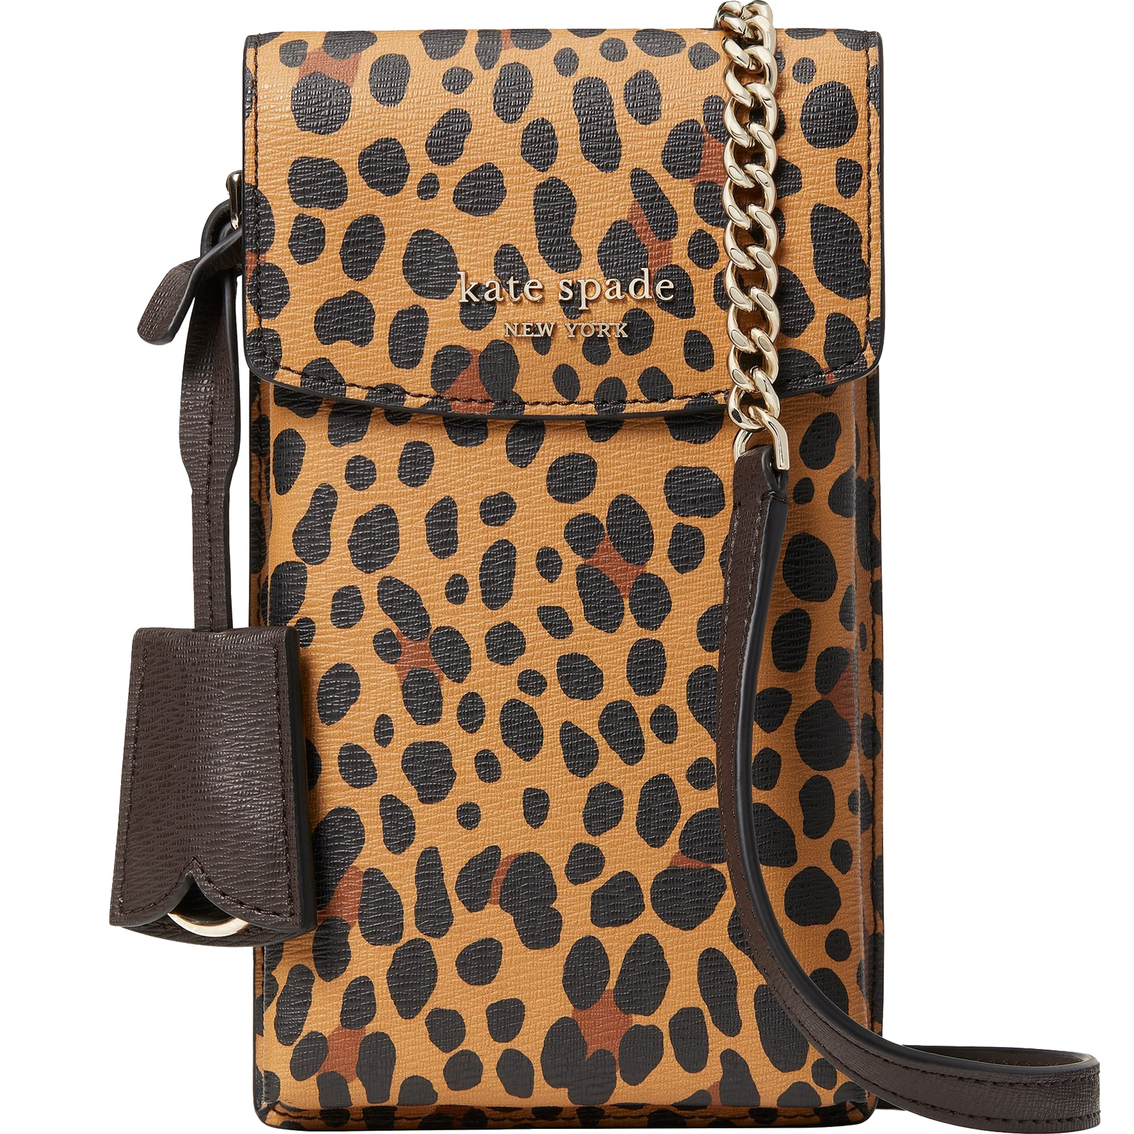 Kate Spade New York Spencer Leopard Printed Pvc Ns Phone Crossbody Bag |  Crossbody Bags | Mother's Day Shop | Shop The Exchange